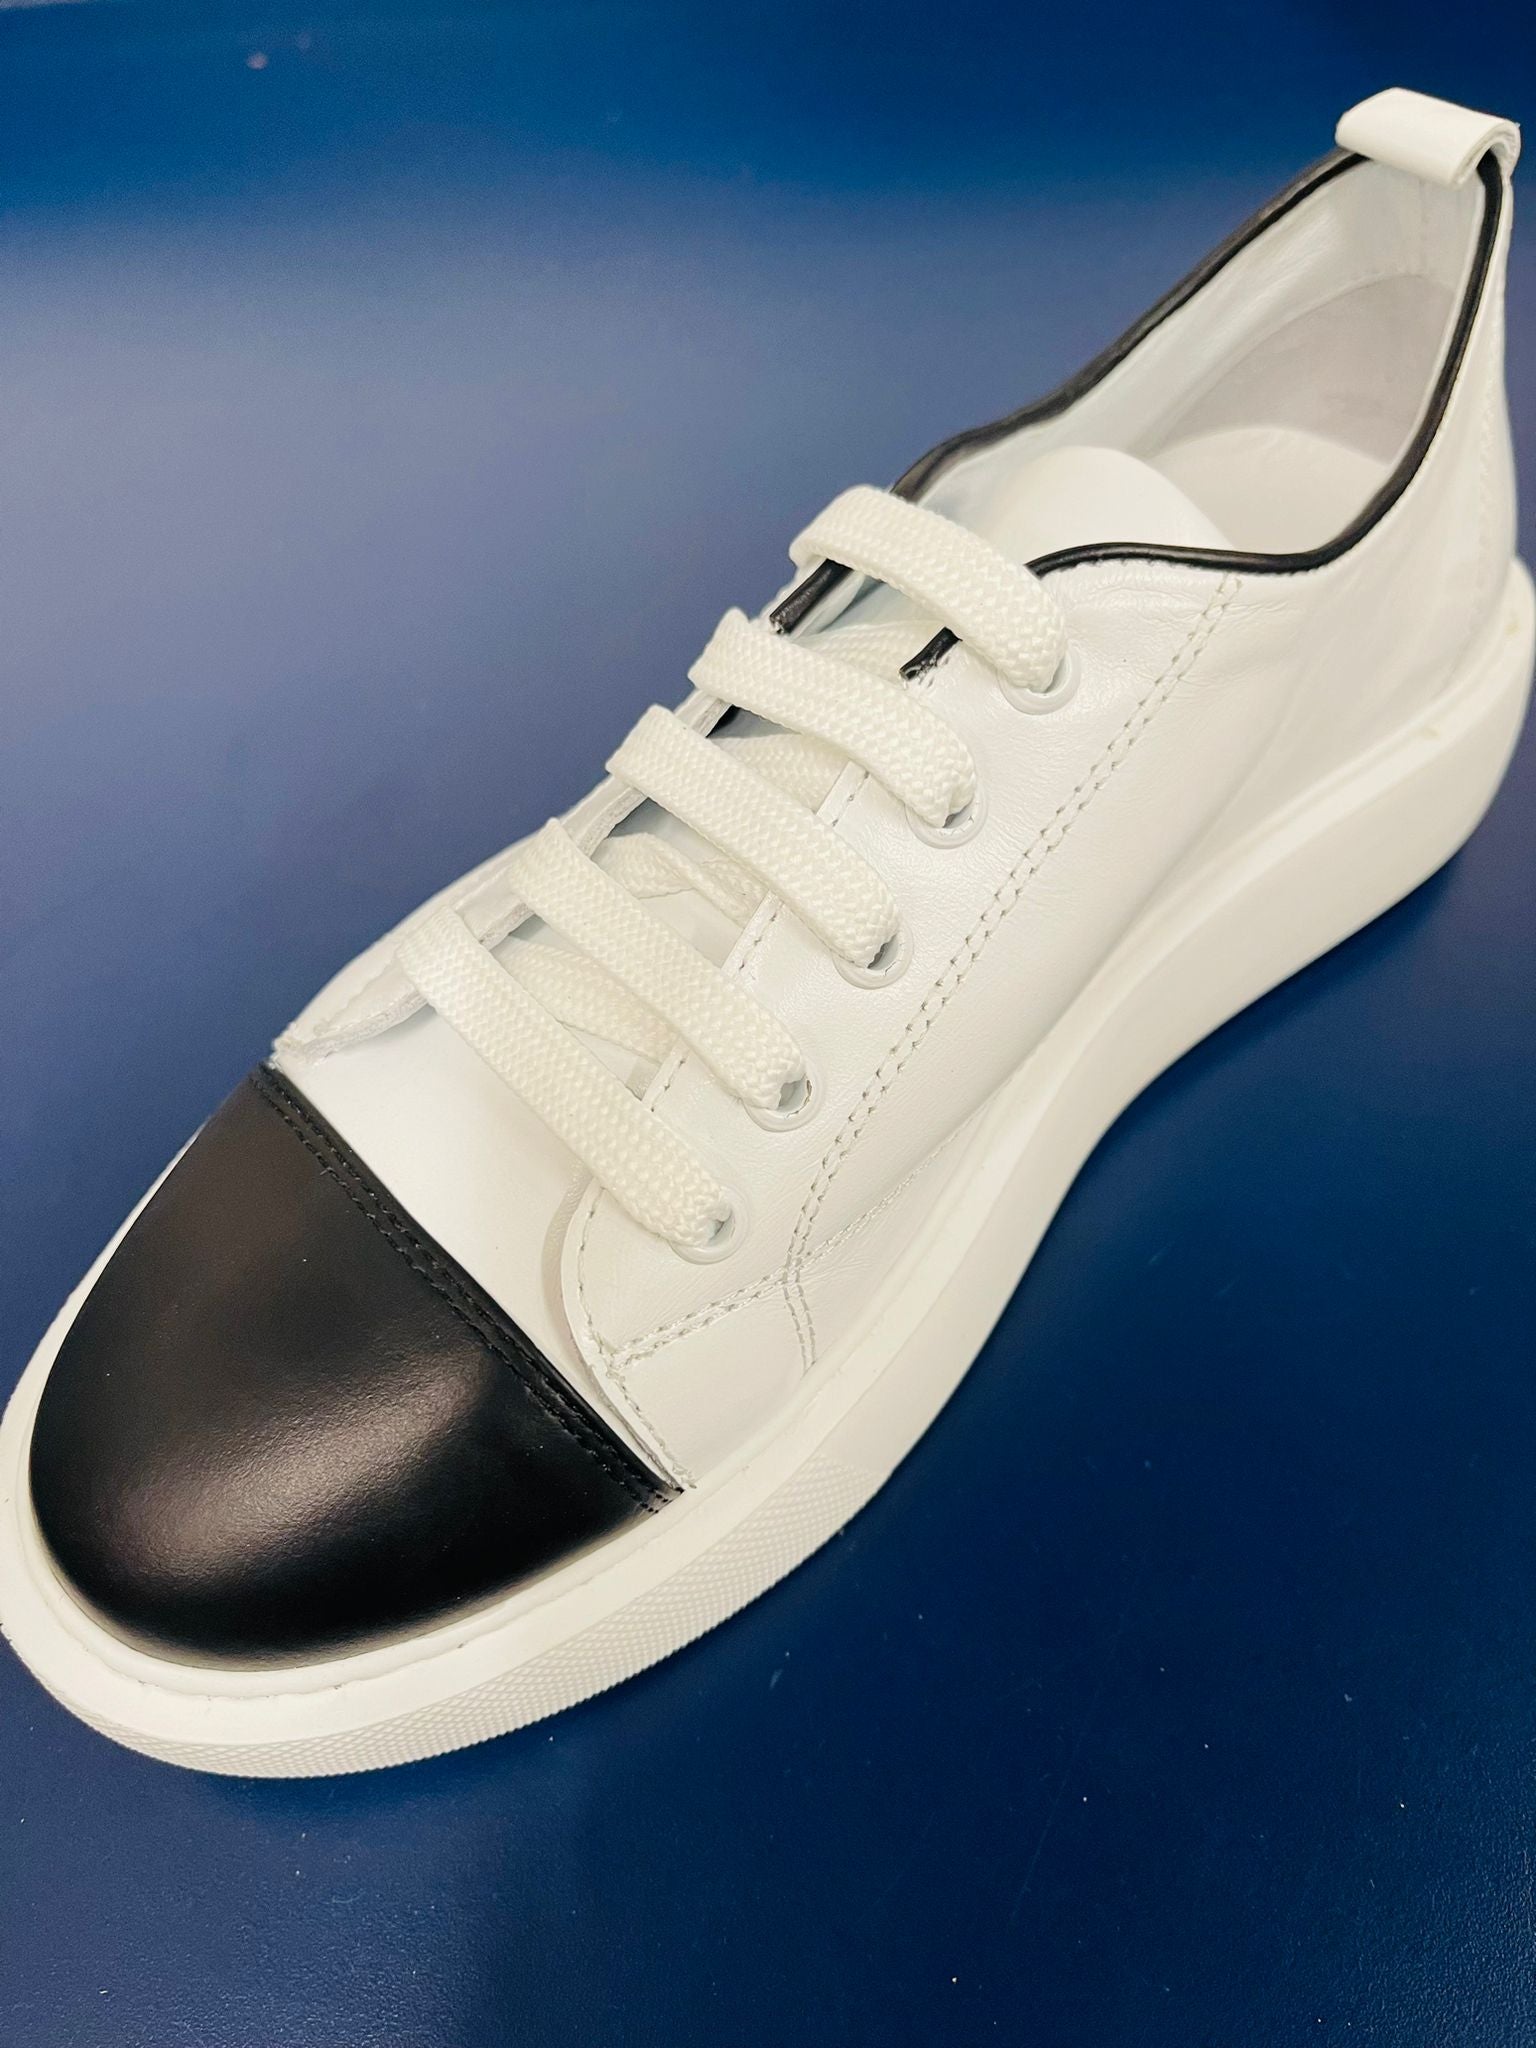 Black And White Tennis Shoes Chunky Bottom